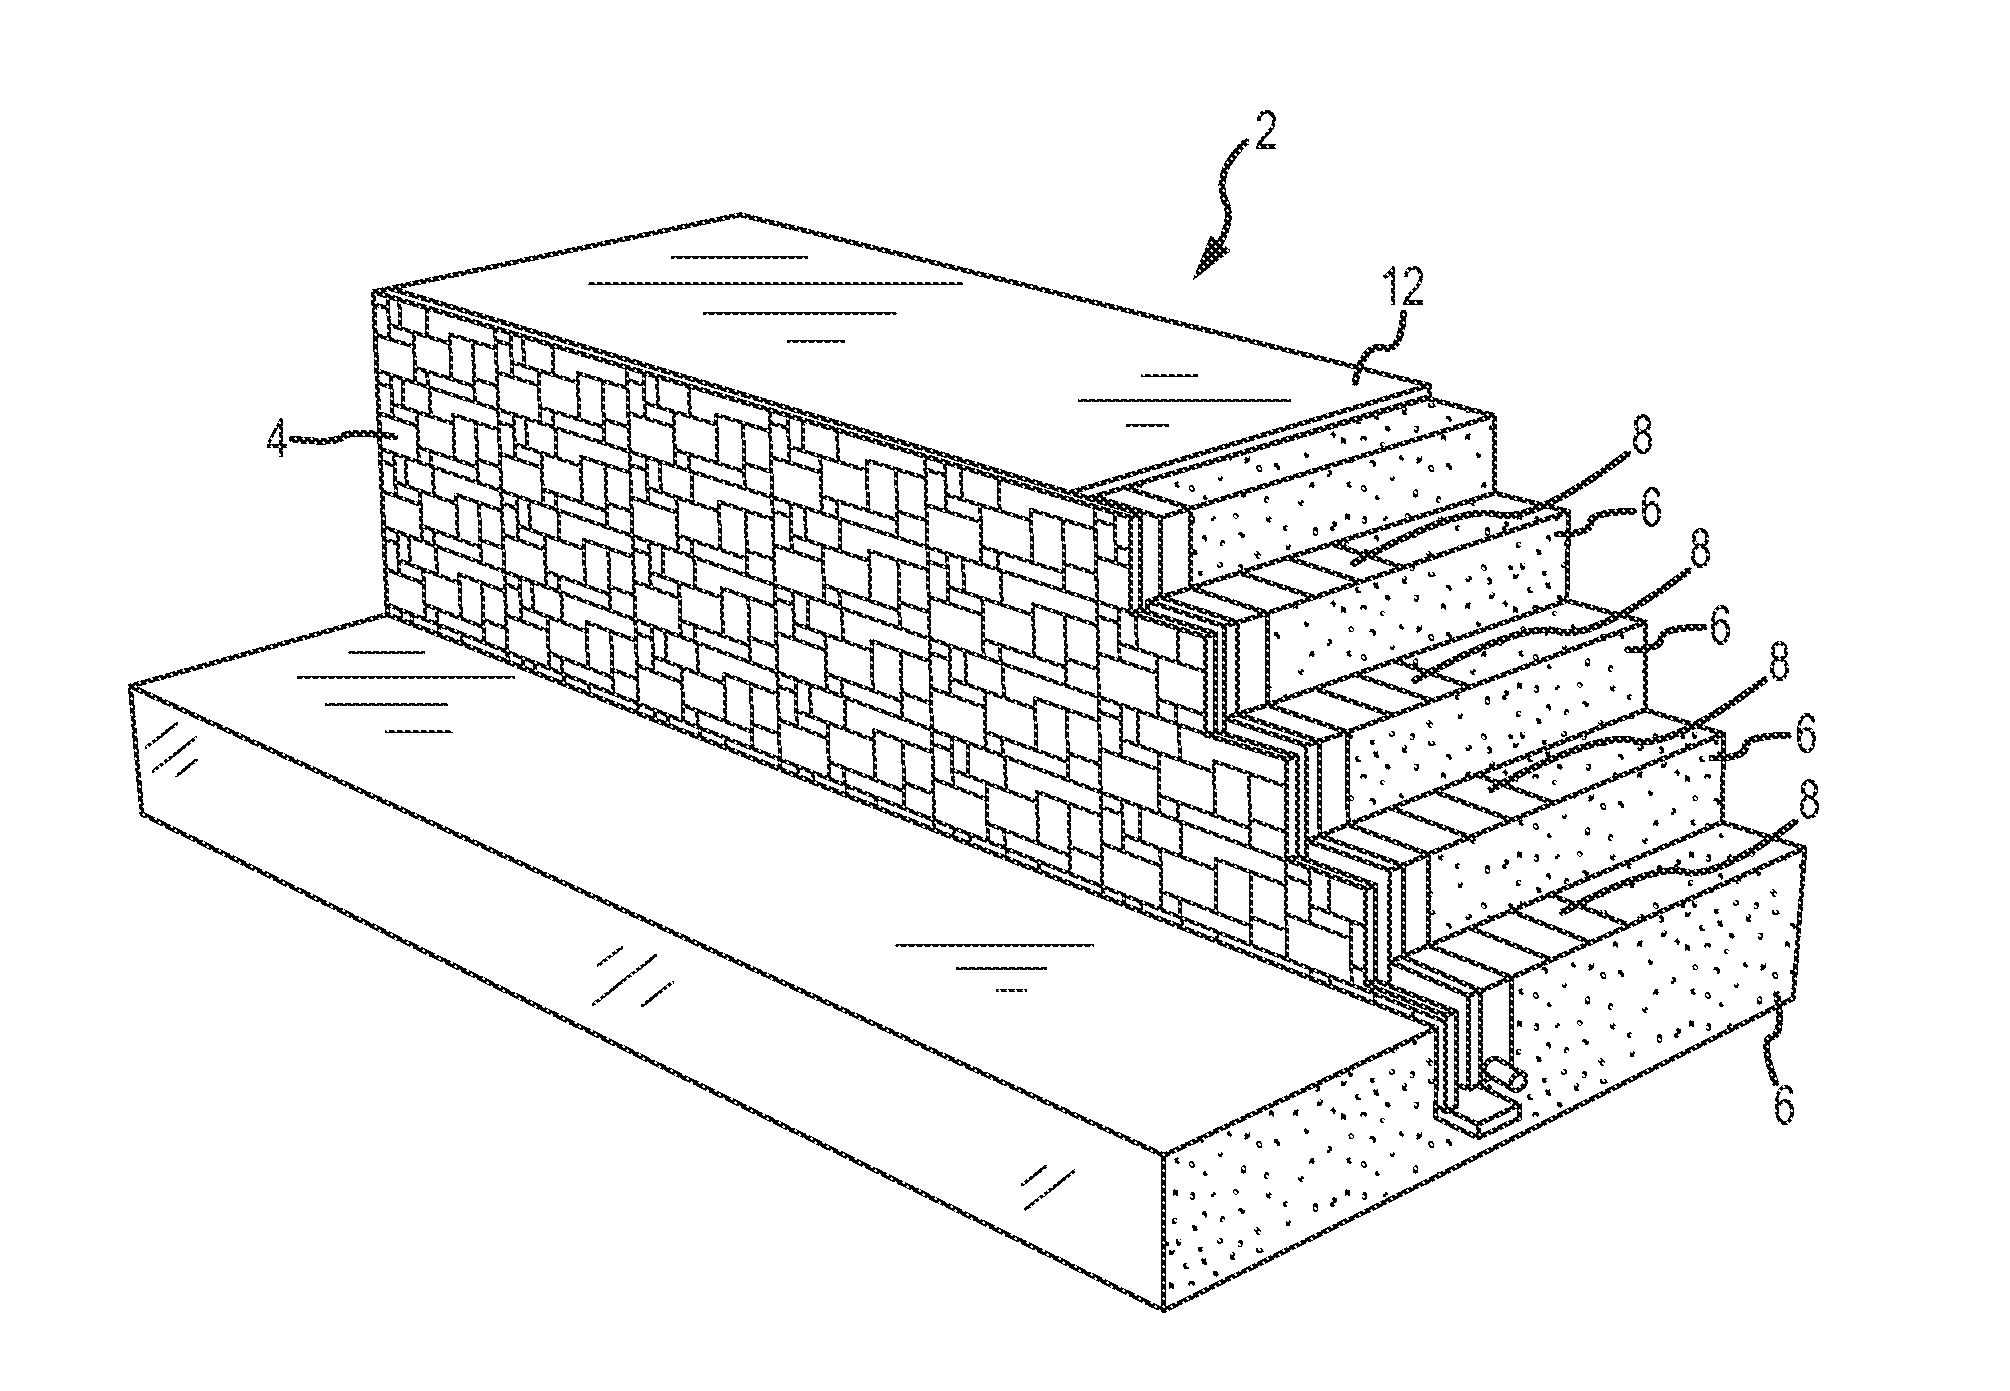 System and method for retaining wall